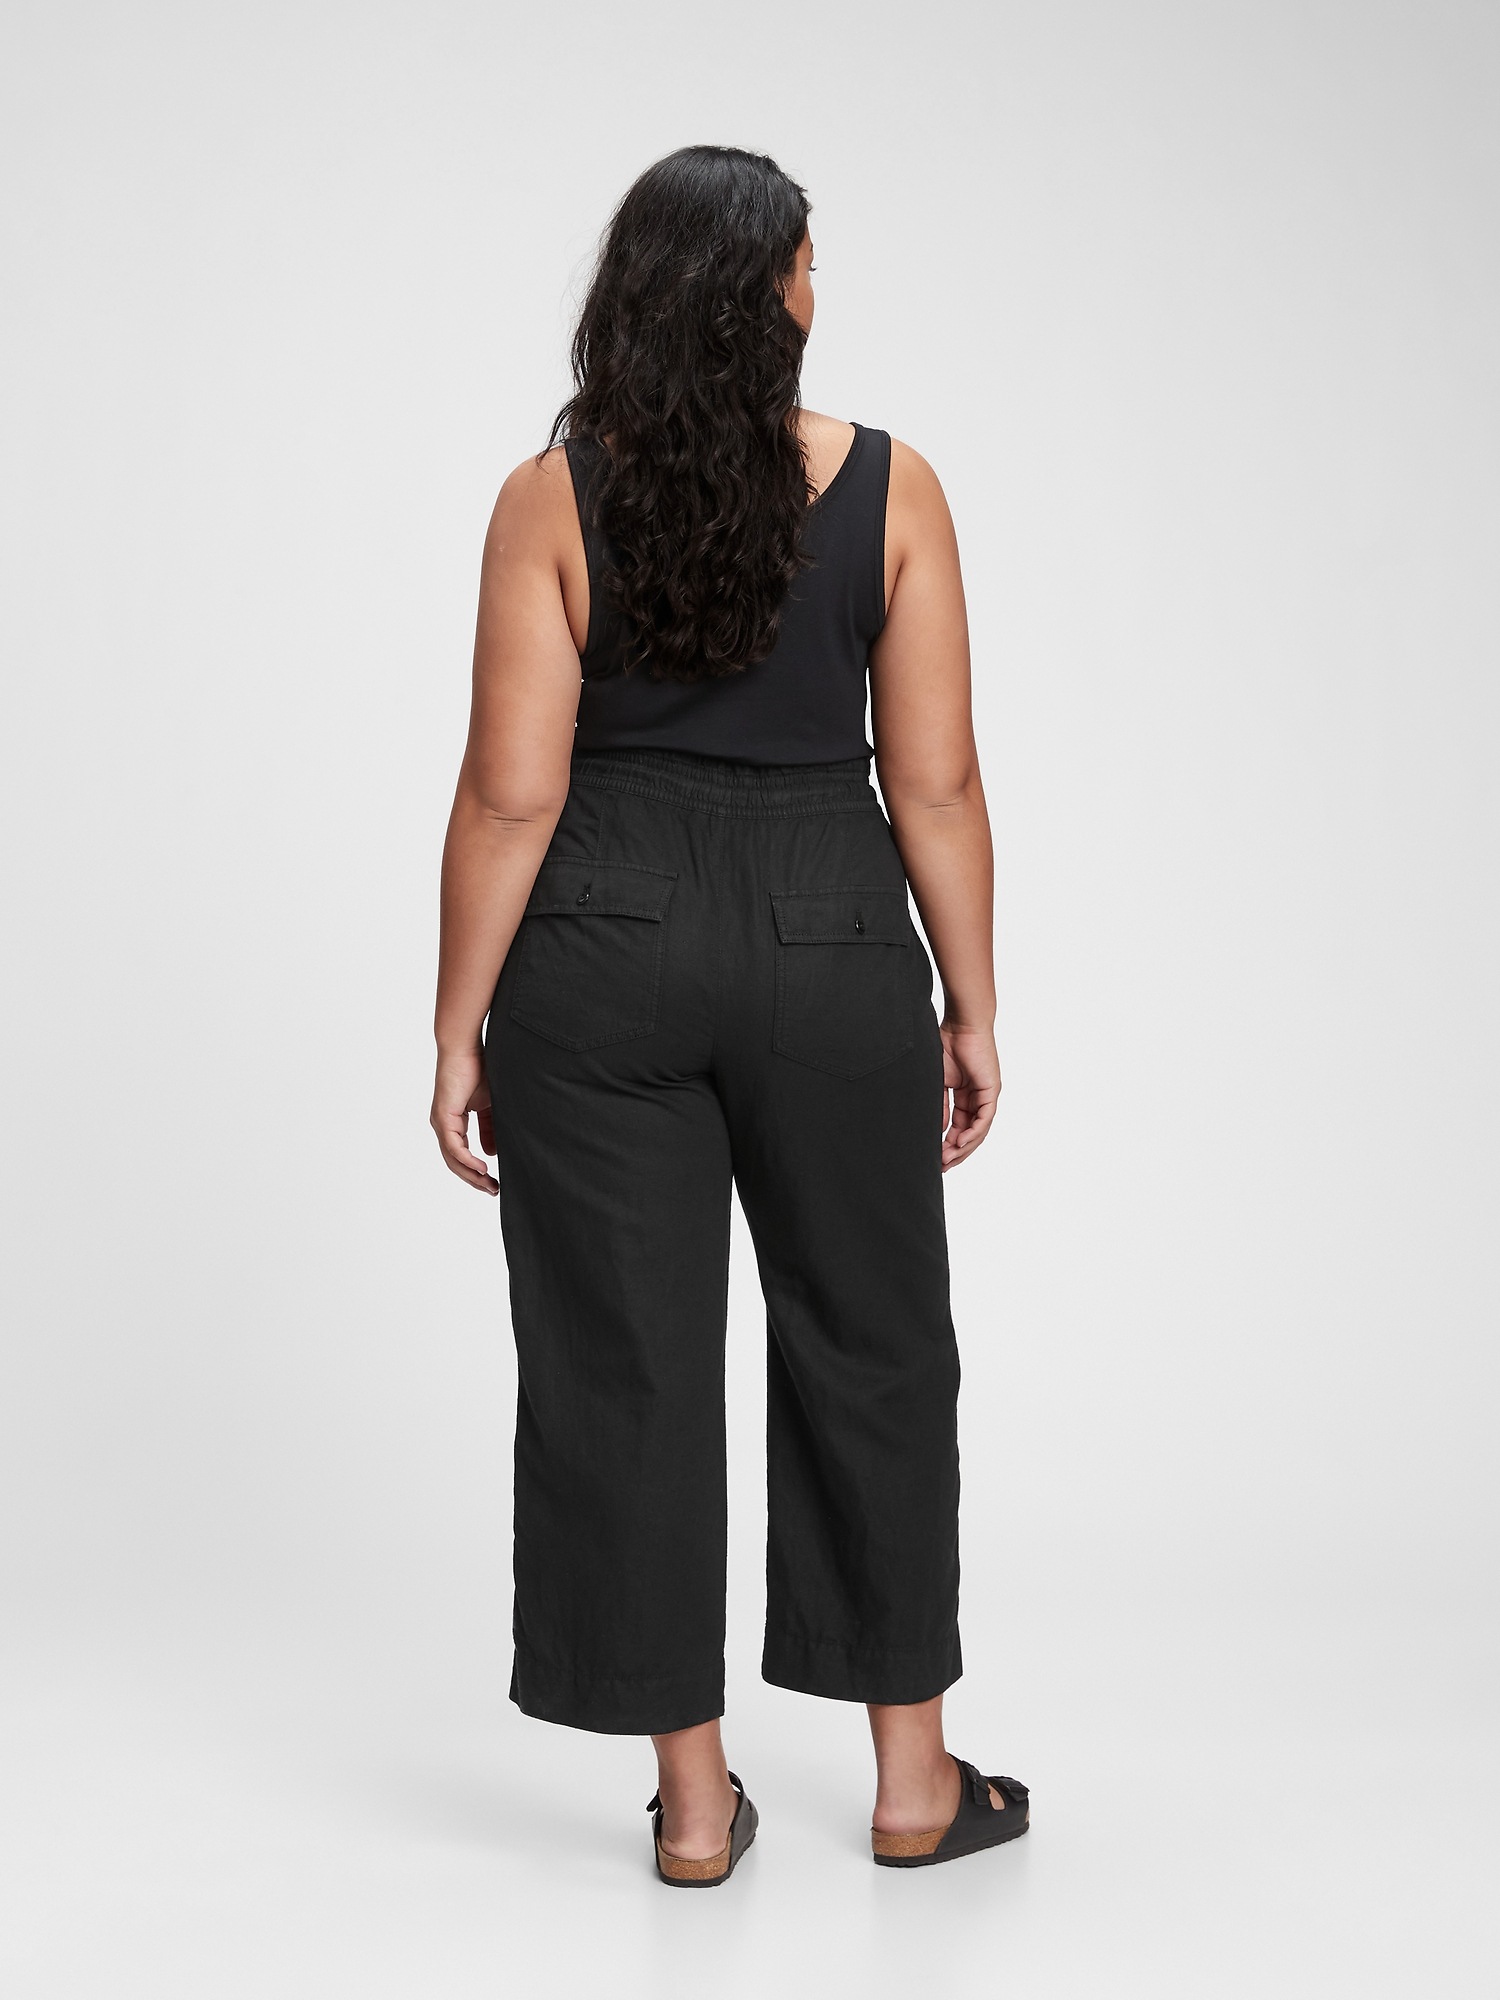 High Rise Wide-Leg Pants in Linen-Cotton with Washwell™ | Gap